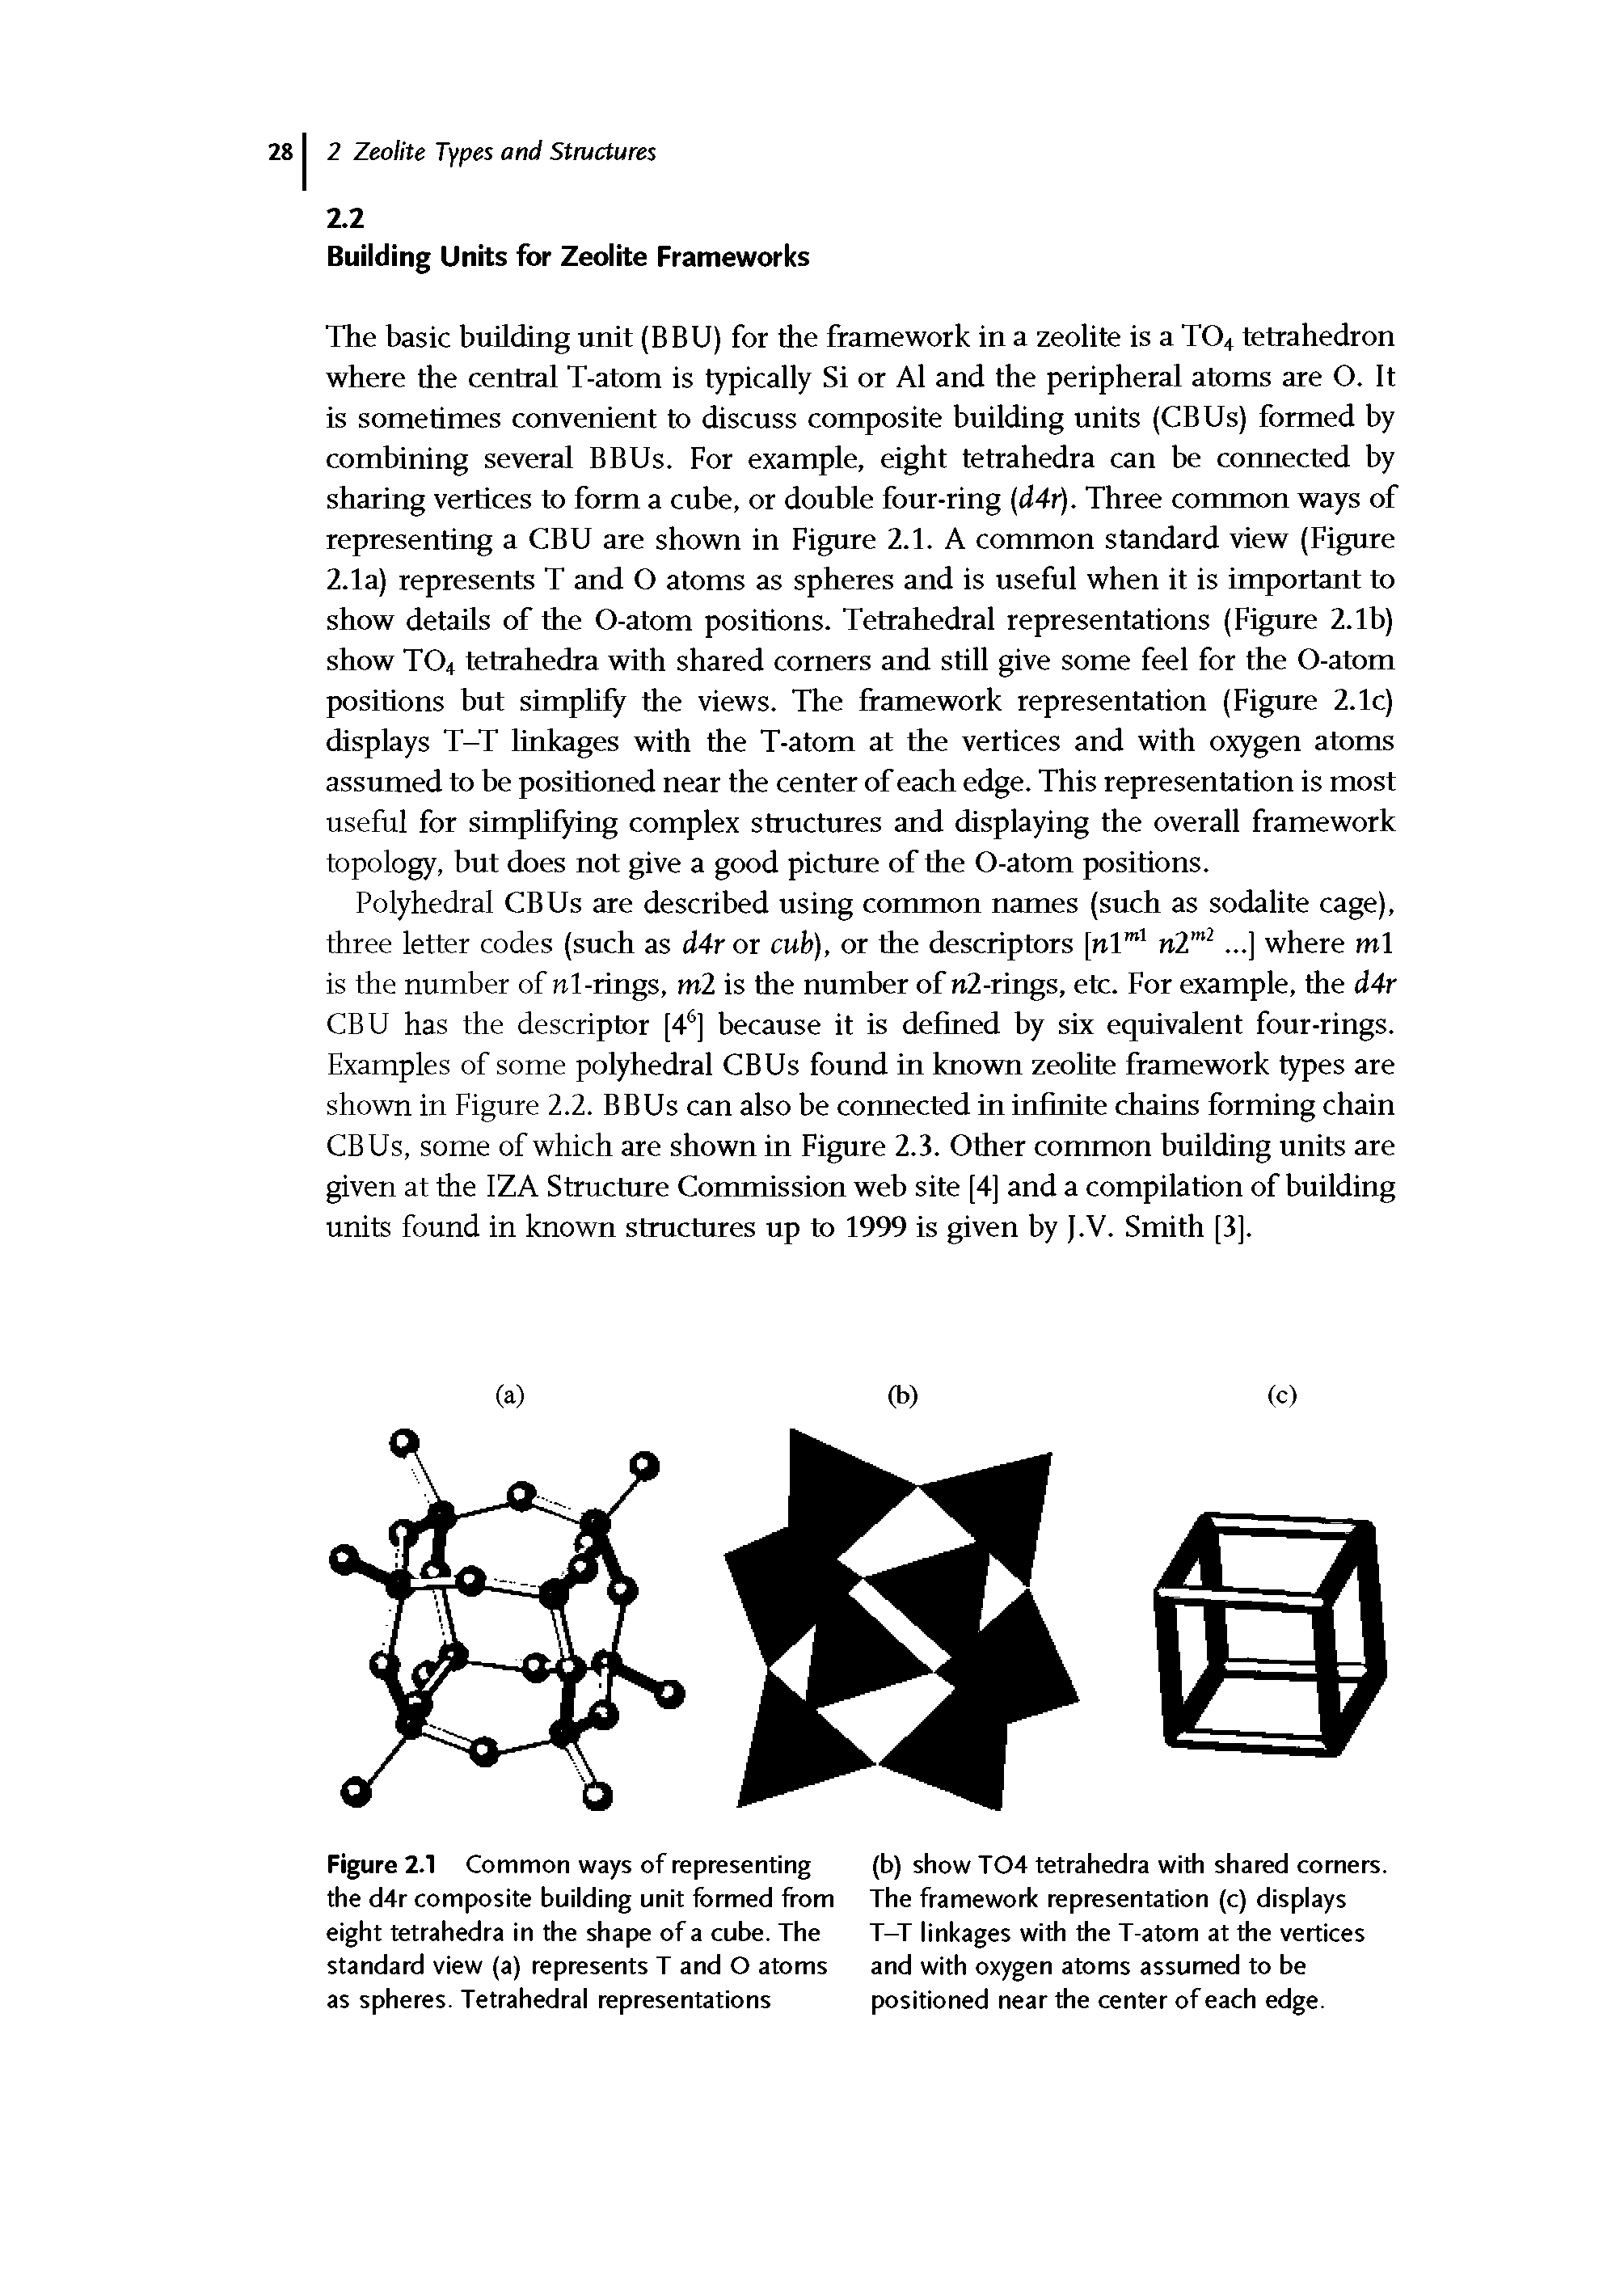 Figure 2.1 Common ways of representing the d4r composite building unit formed from eight tetrahedra in the shape of a cube. The standard view (a) represents T and O atoms as spheres. Tetrahedral representations...